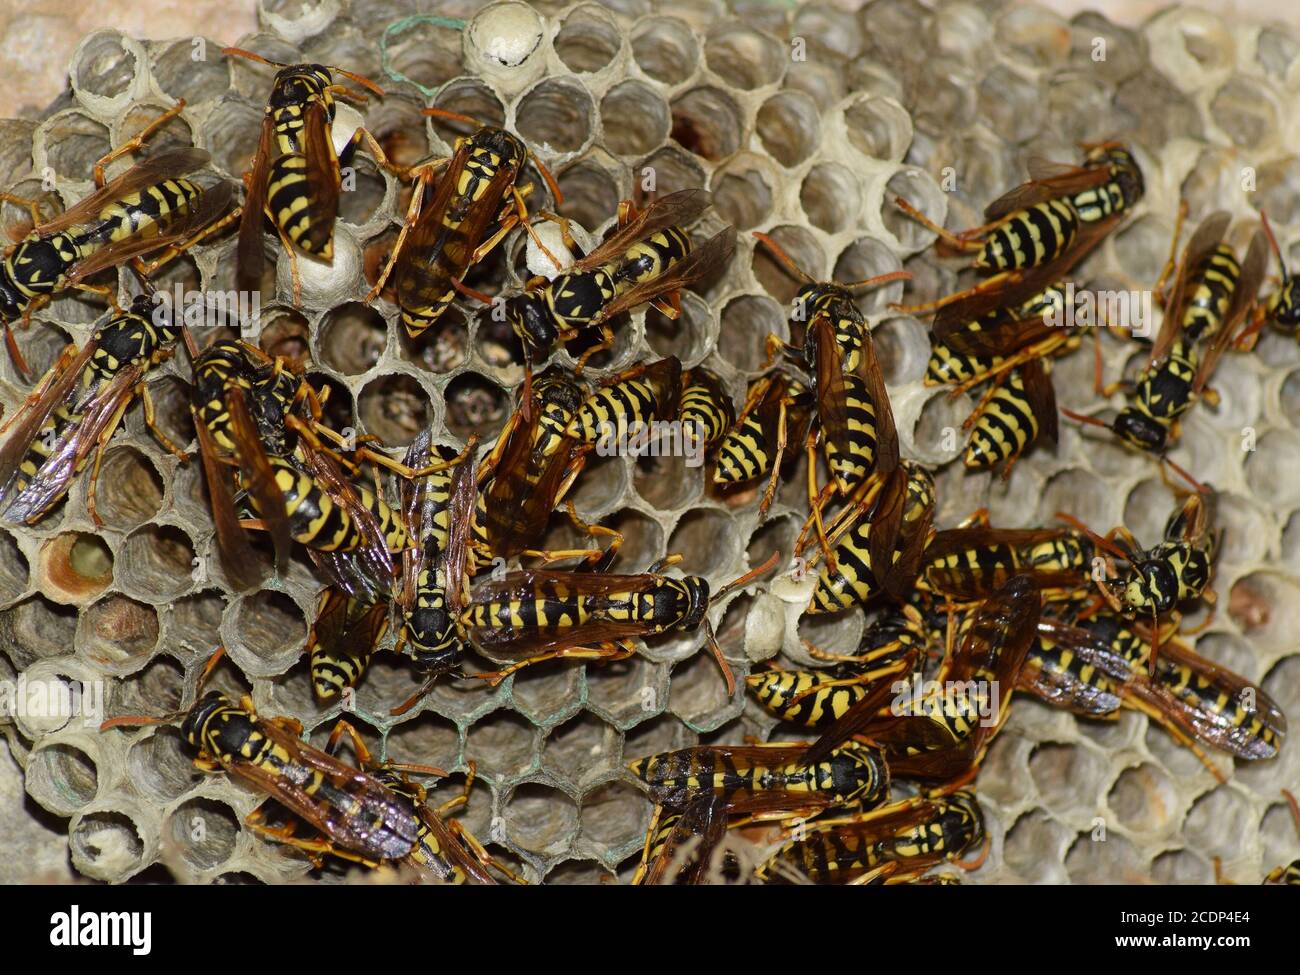 Wasp nest with wasps sitting on it. Stock Photo